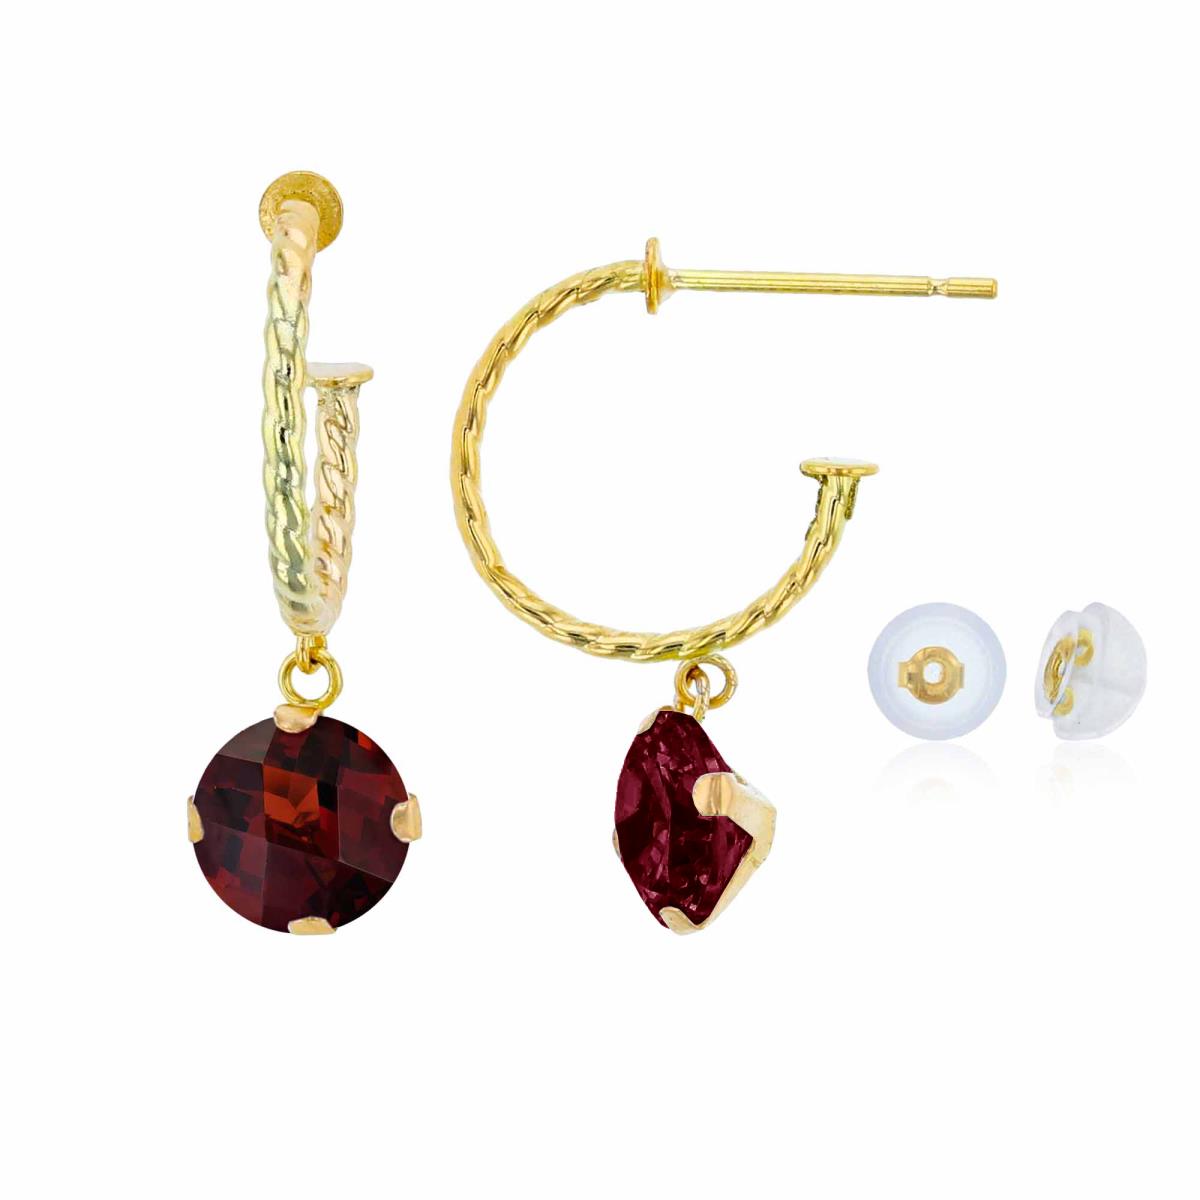 10K Yellow Gold 12mm Rope Half-Hoop with 6mm Rd Garnet Martini Drop Earring with Silicone Back